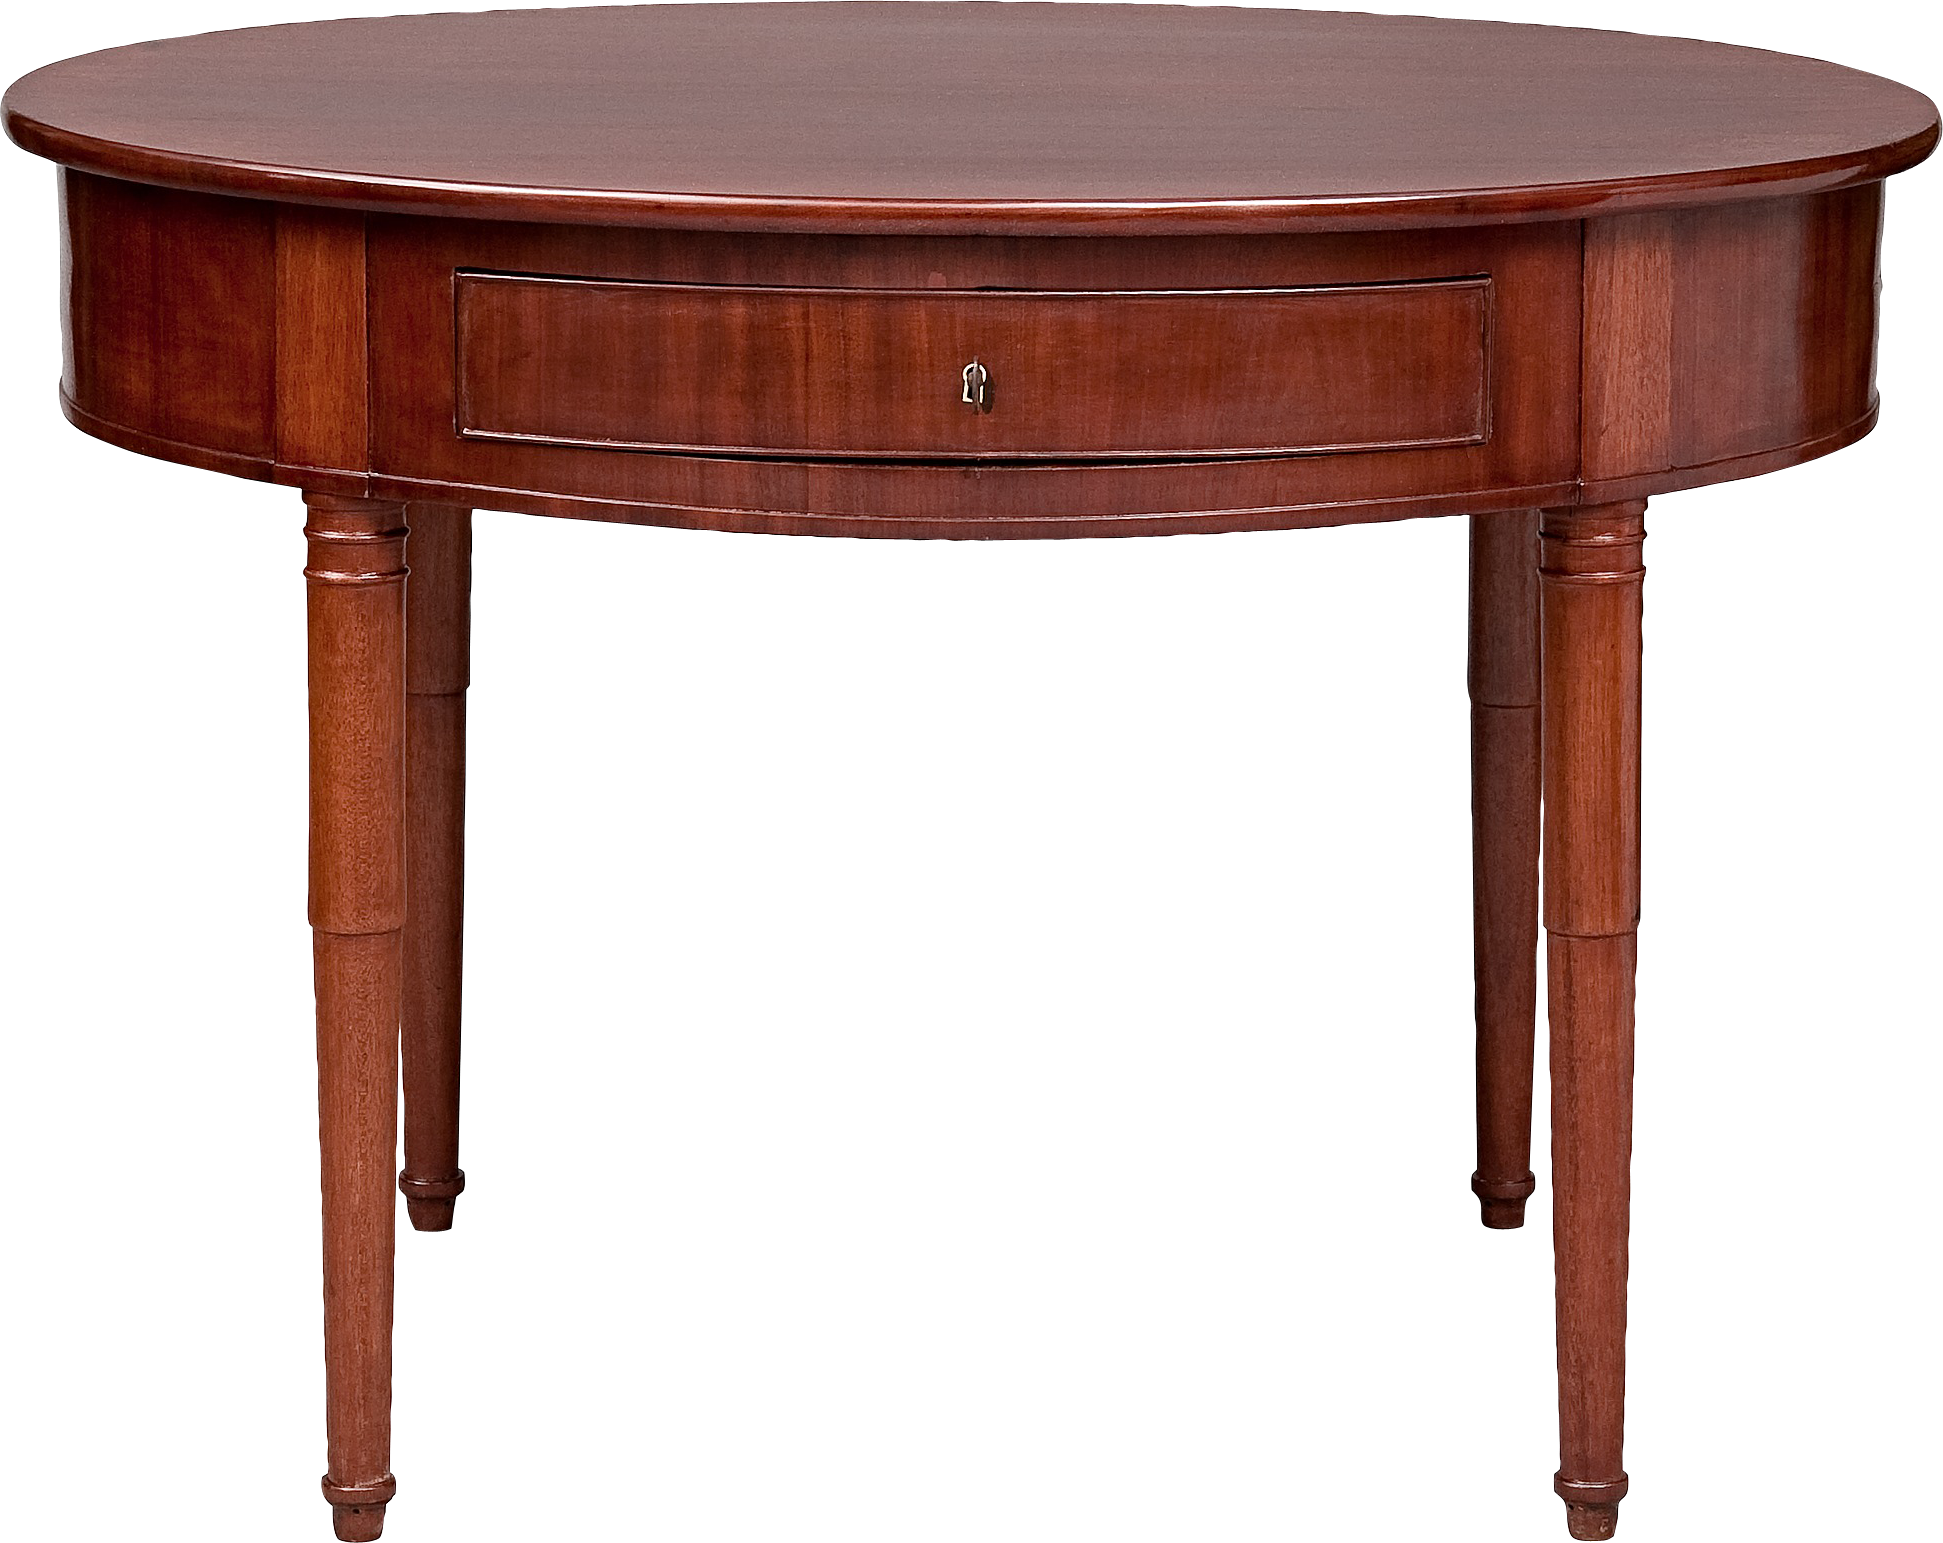 Table Png Image Transparent Image Download, Size: 1943x1543px For Transparent Side Tables For Living Rooms (View 13 of 20)